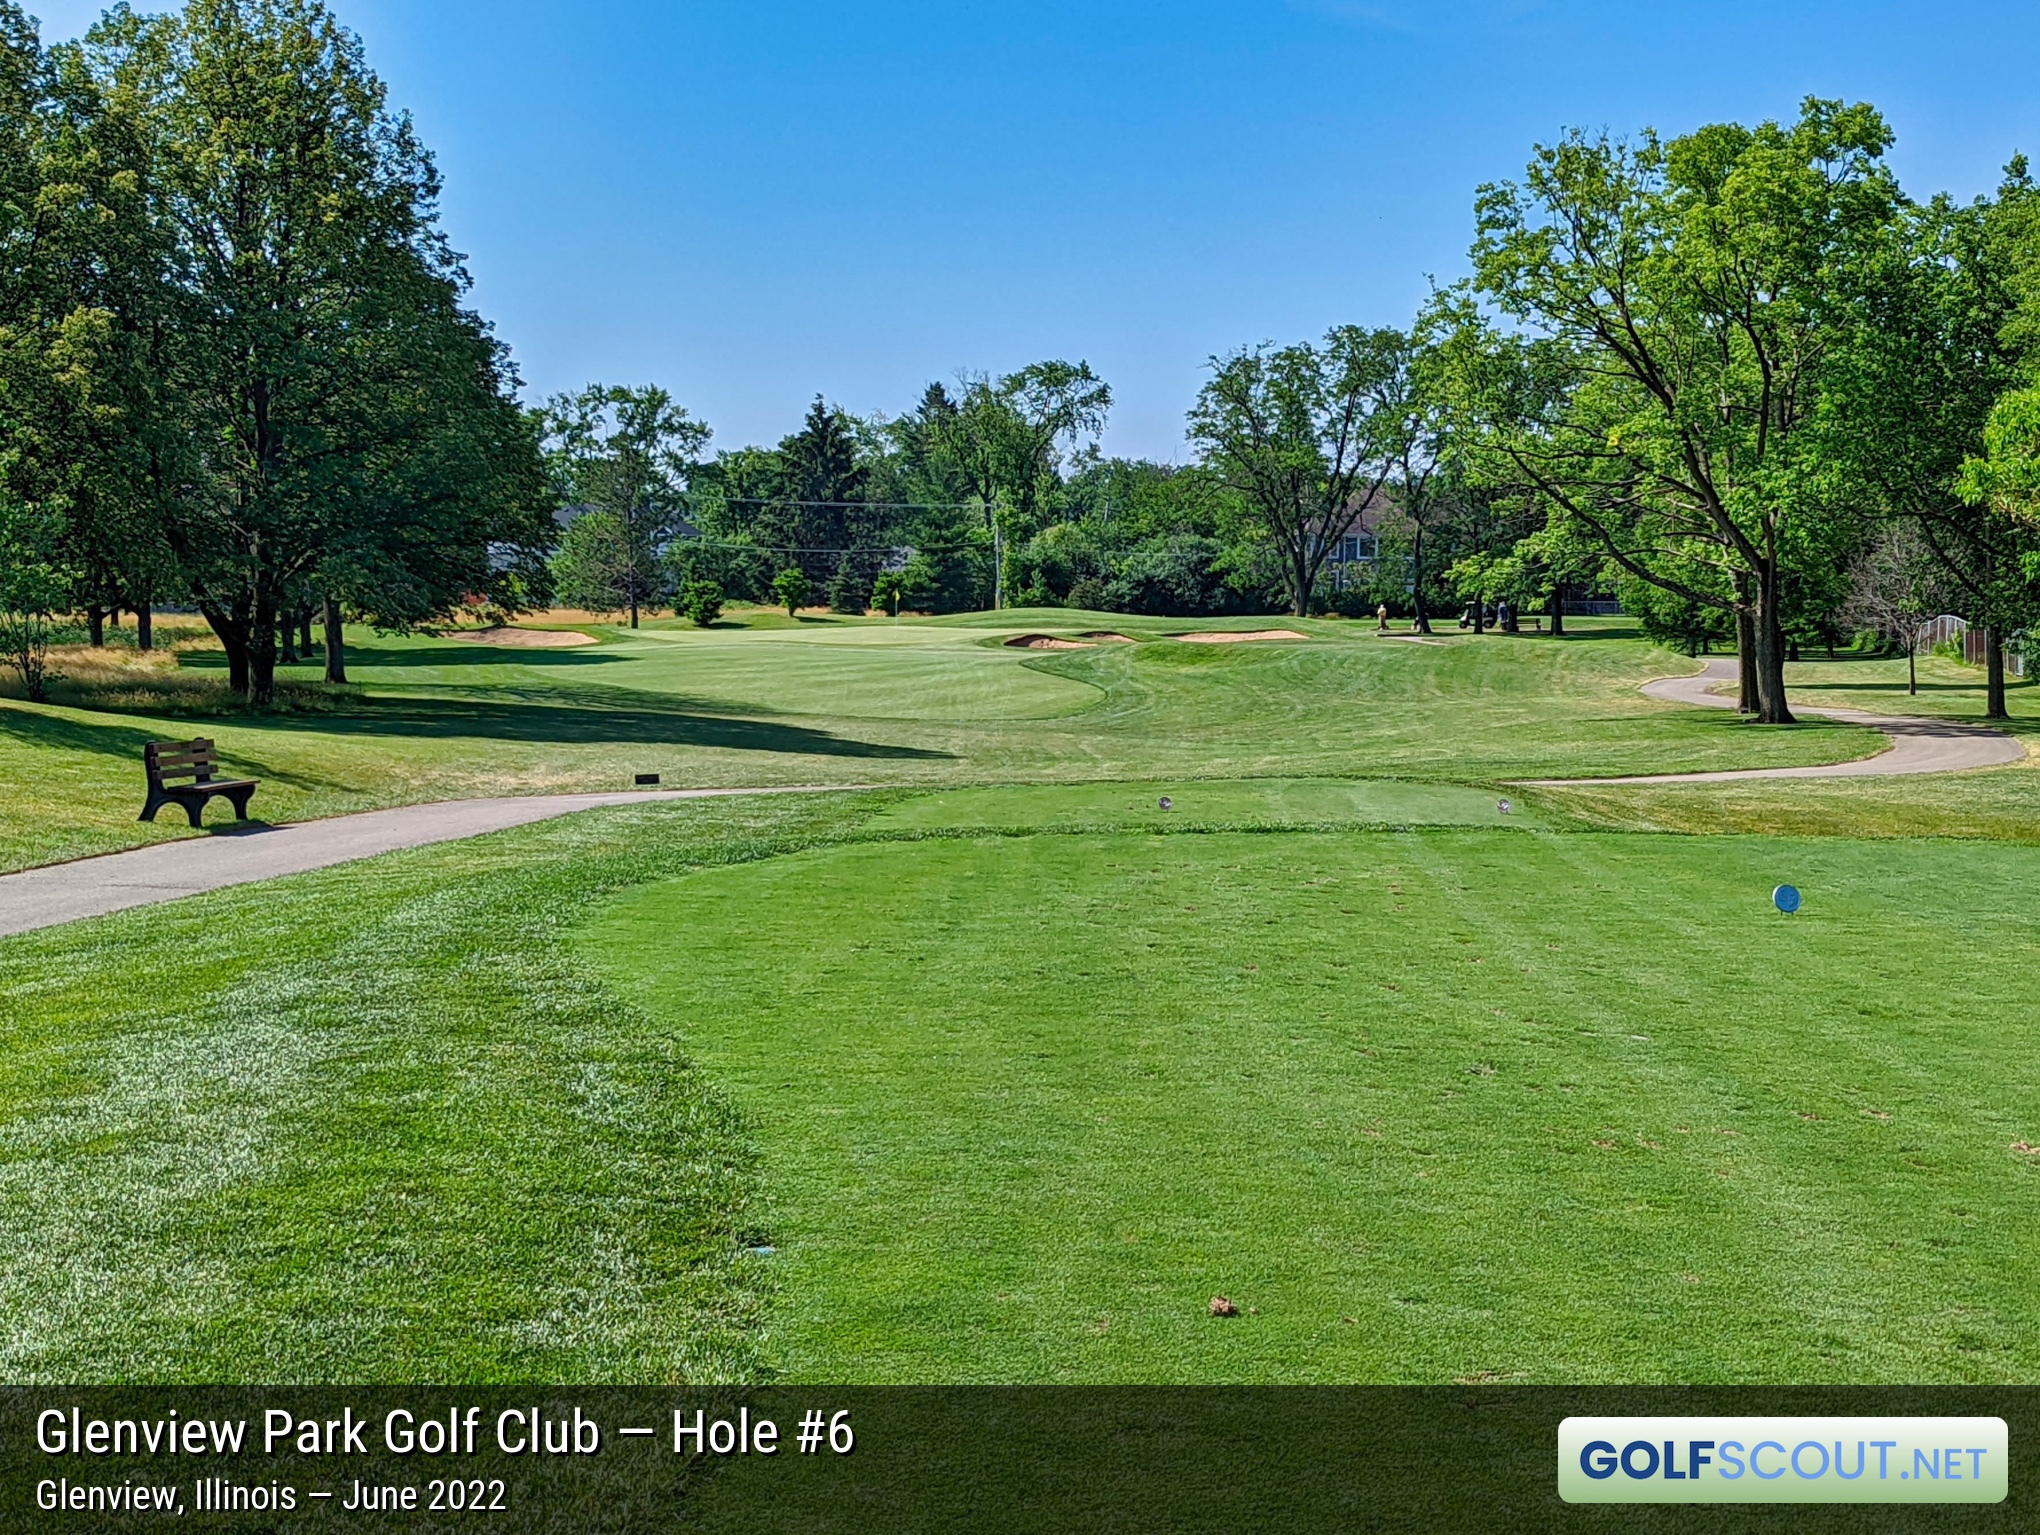 Photo of hole #6 at Glenview Park Golf Club in Glenview, Illinois. 